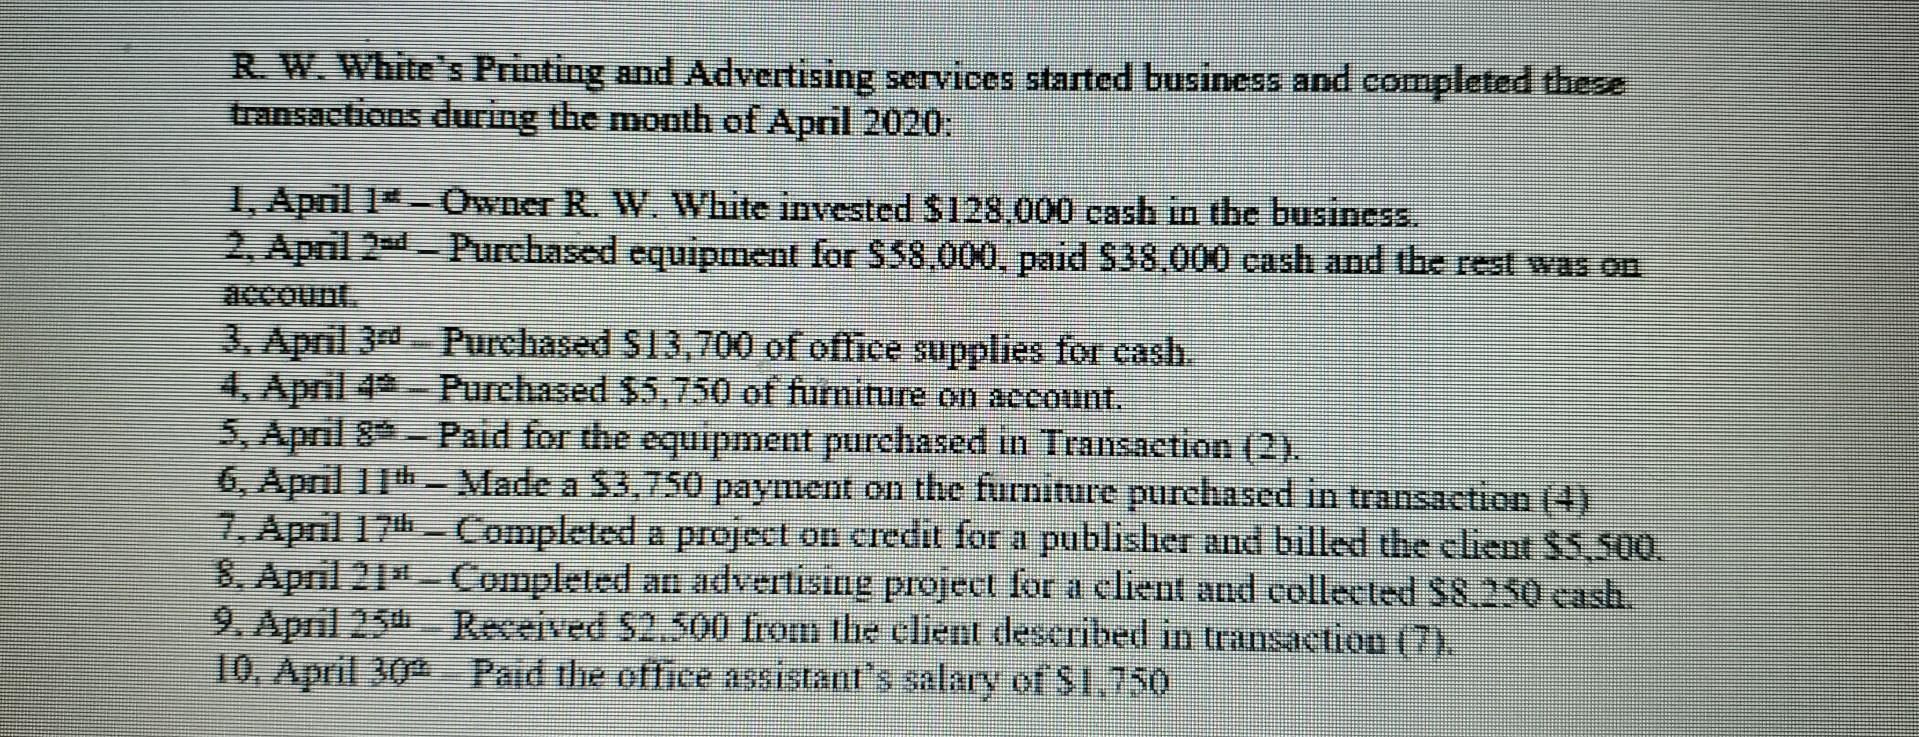 R. W. Whites Printing and Advertising services started business and completed these transactions during the month of April 2